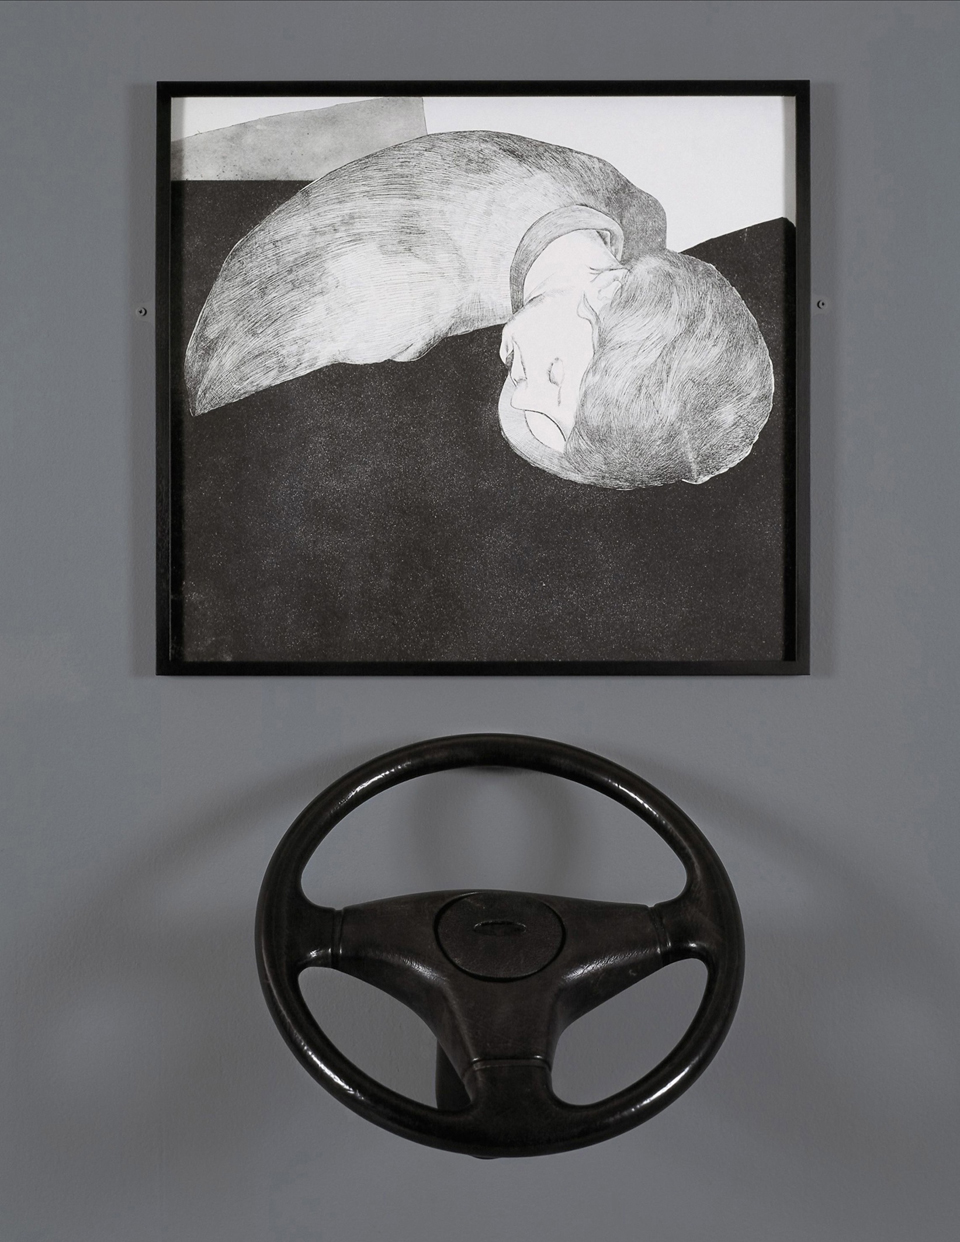 Player (First Act), 2005 Framed etching and steering wheel, 49 x 54 cm Installation view